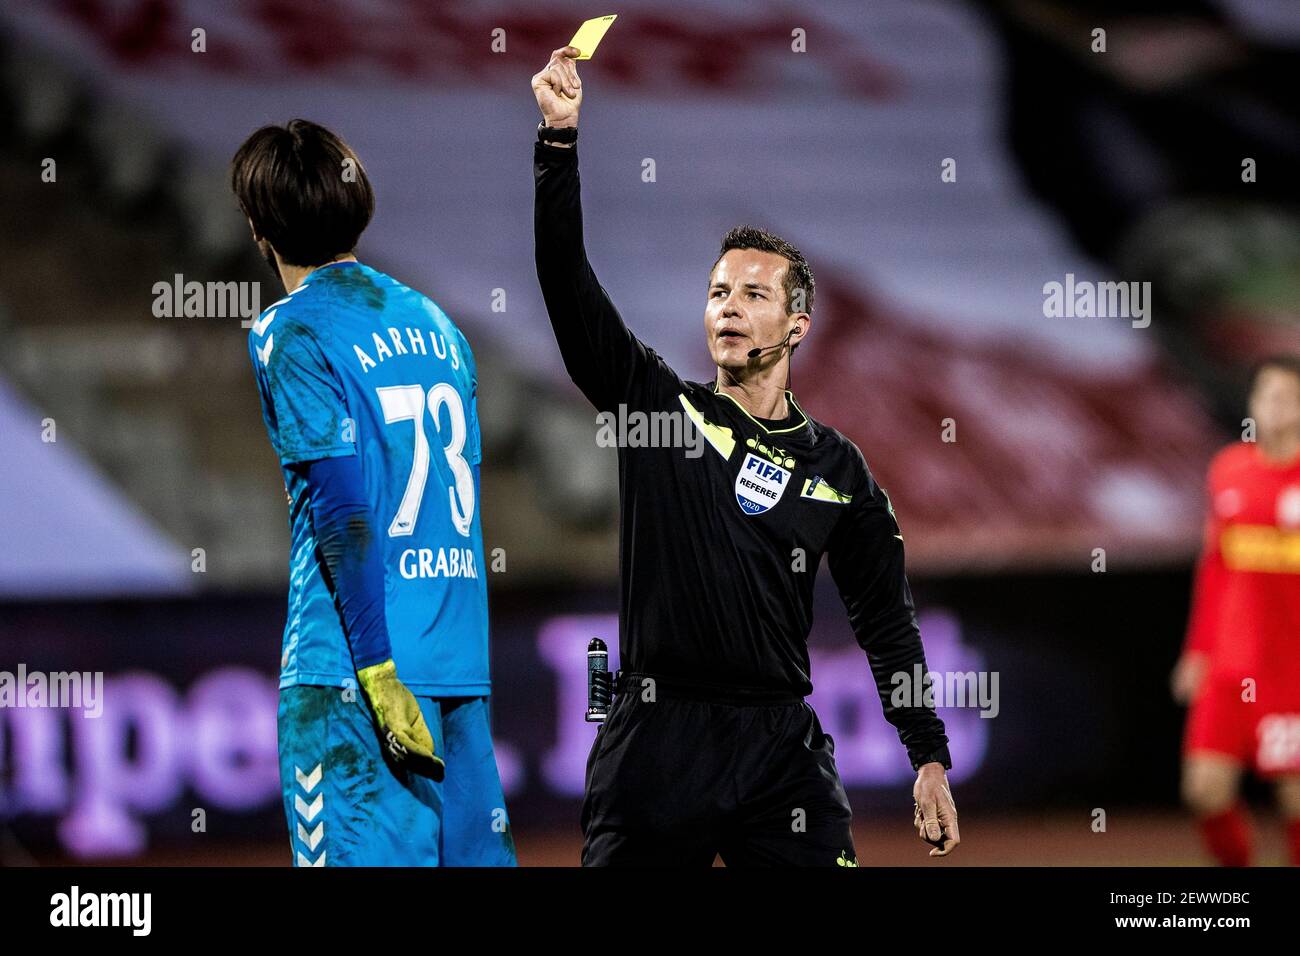 Download Fc Nordsjaelland Goalkeeper High Resolution Stock Photography And Images Alamy